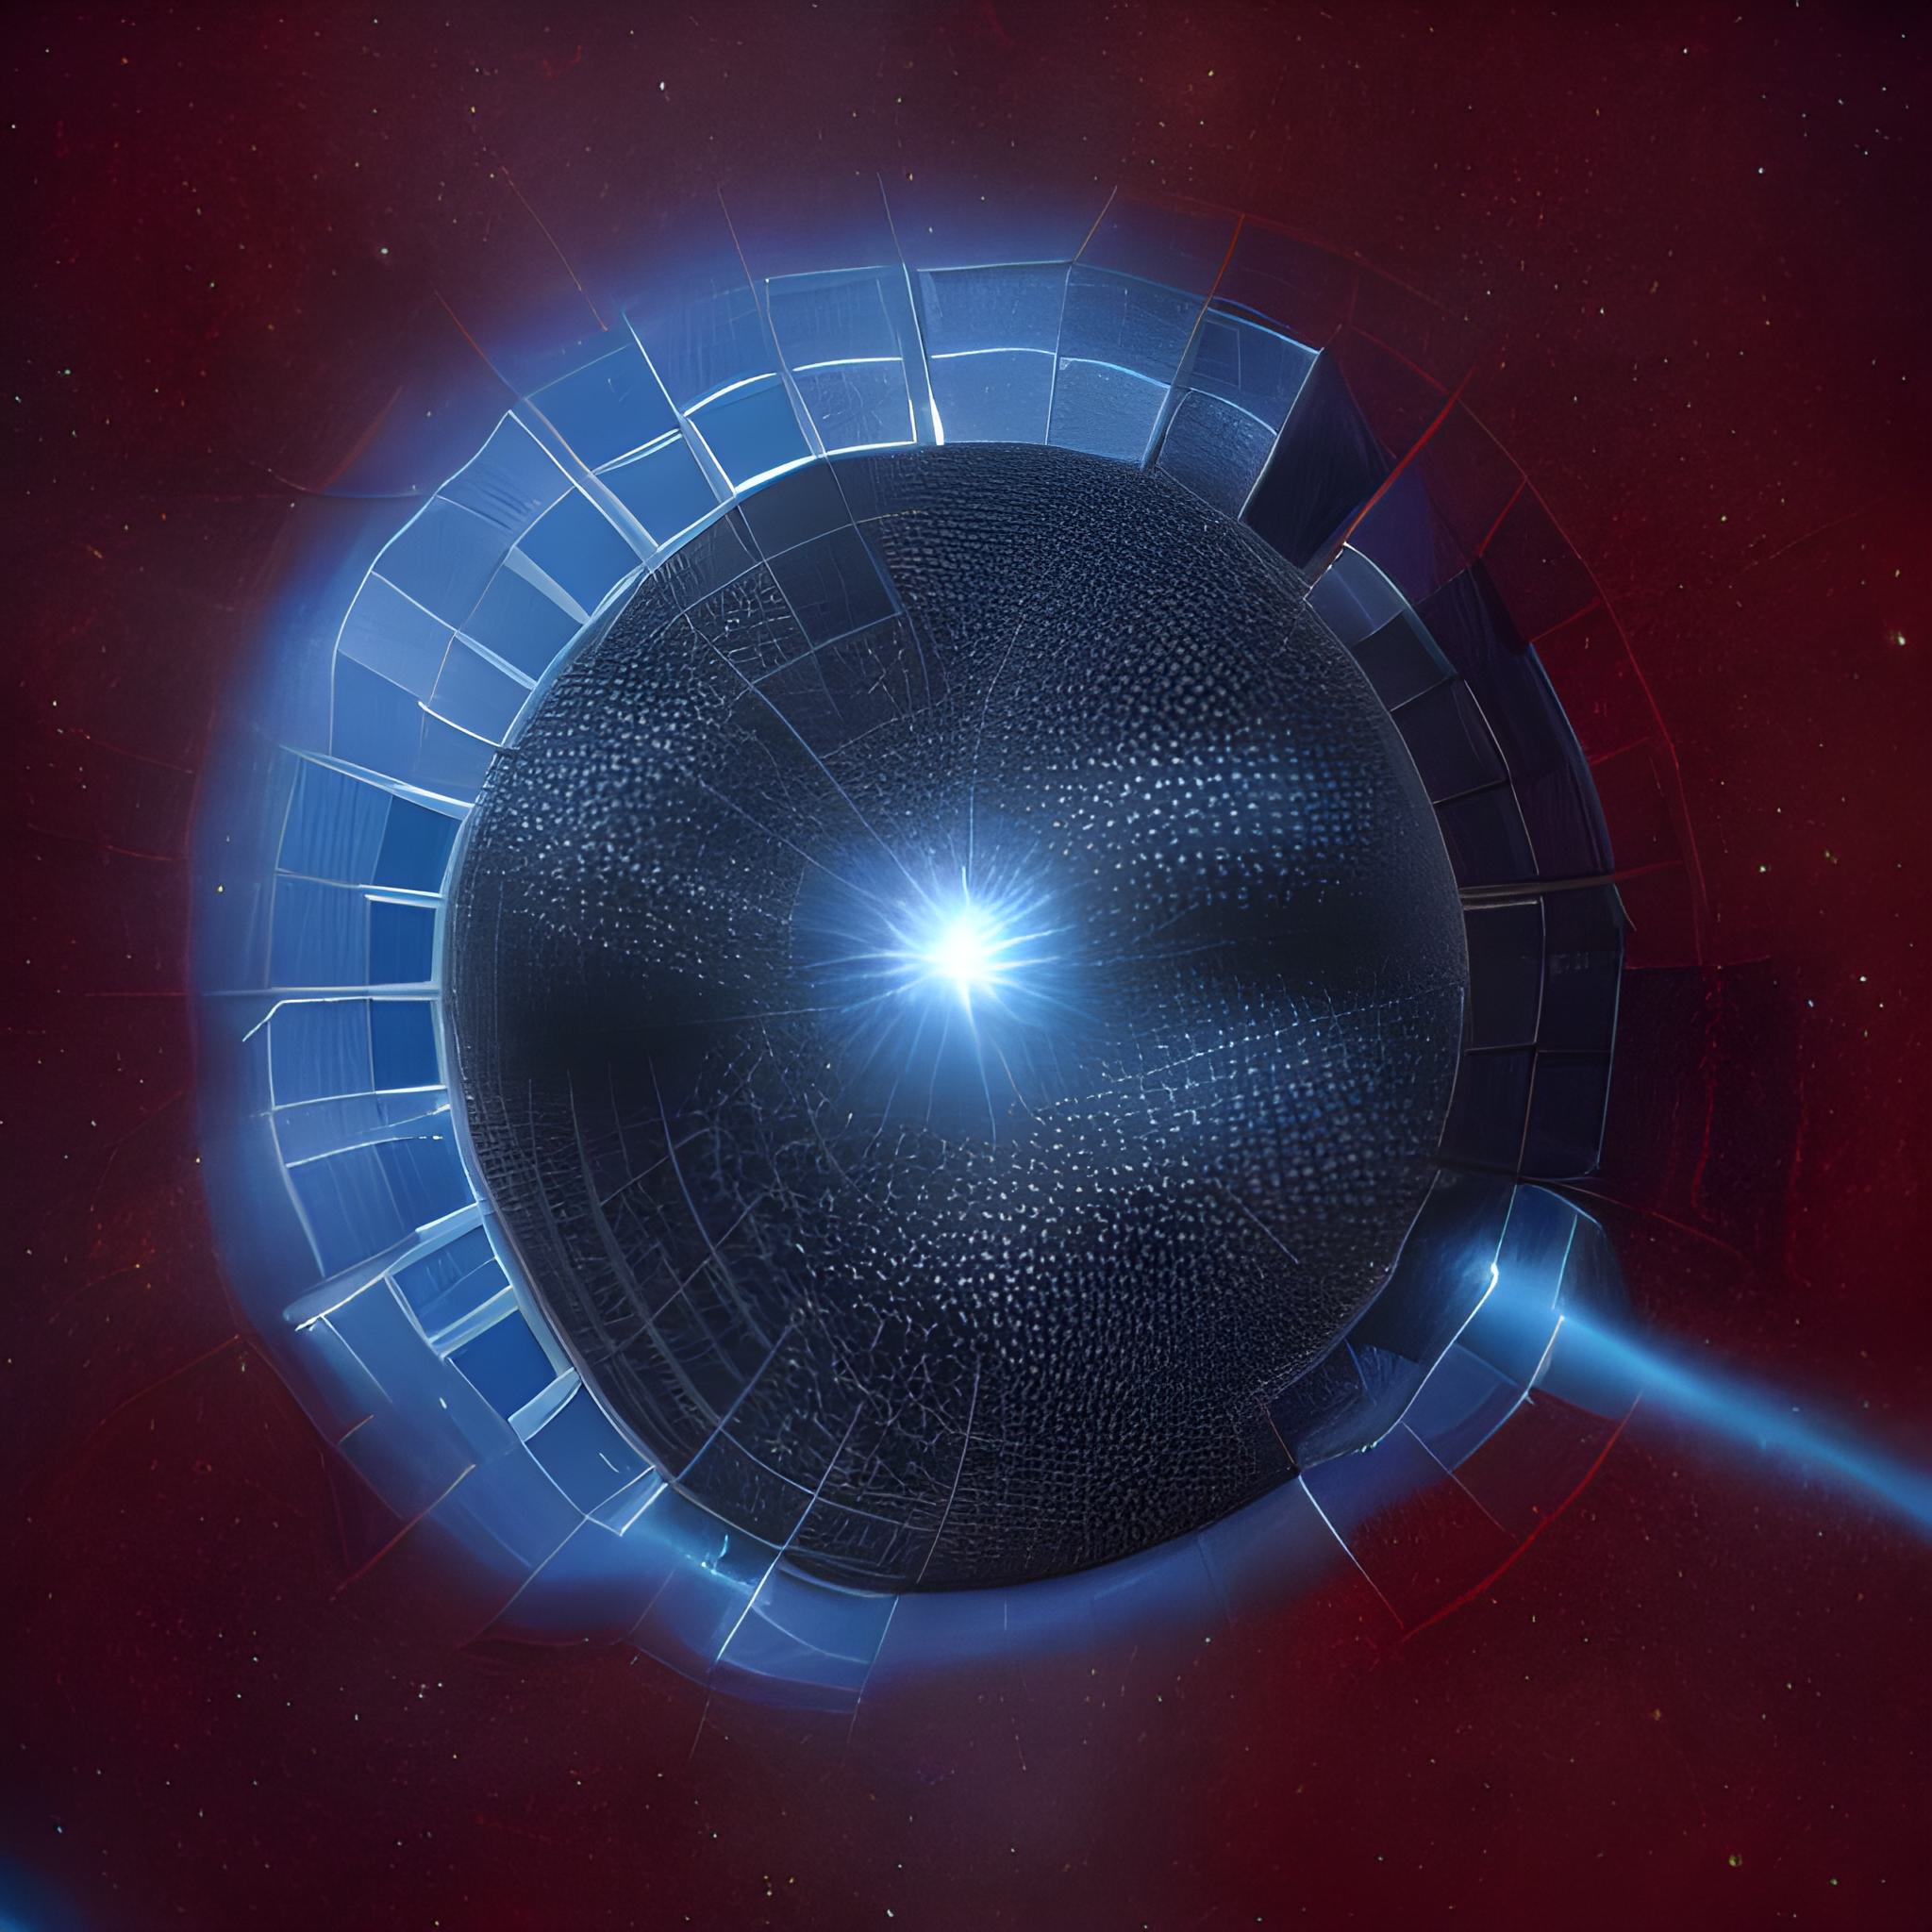 Picture of a Dyson Sphere in space